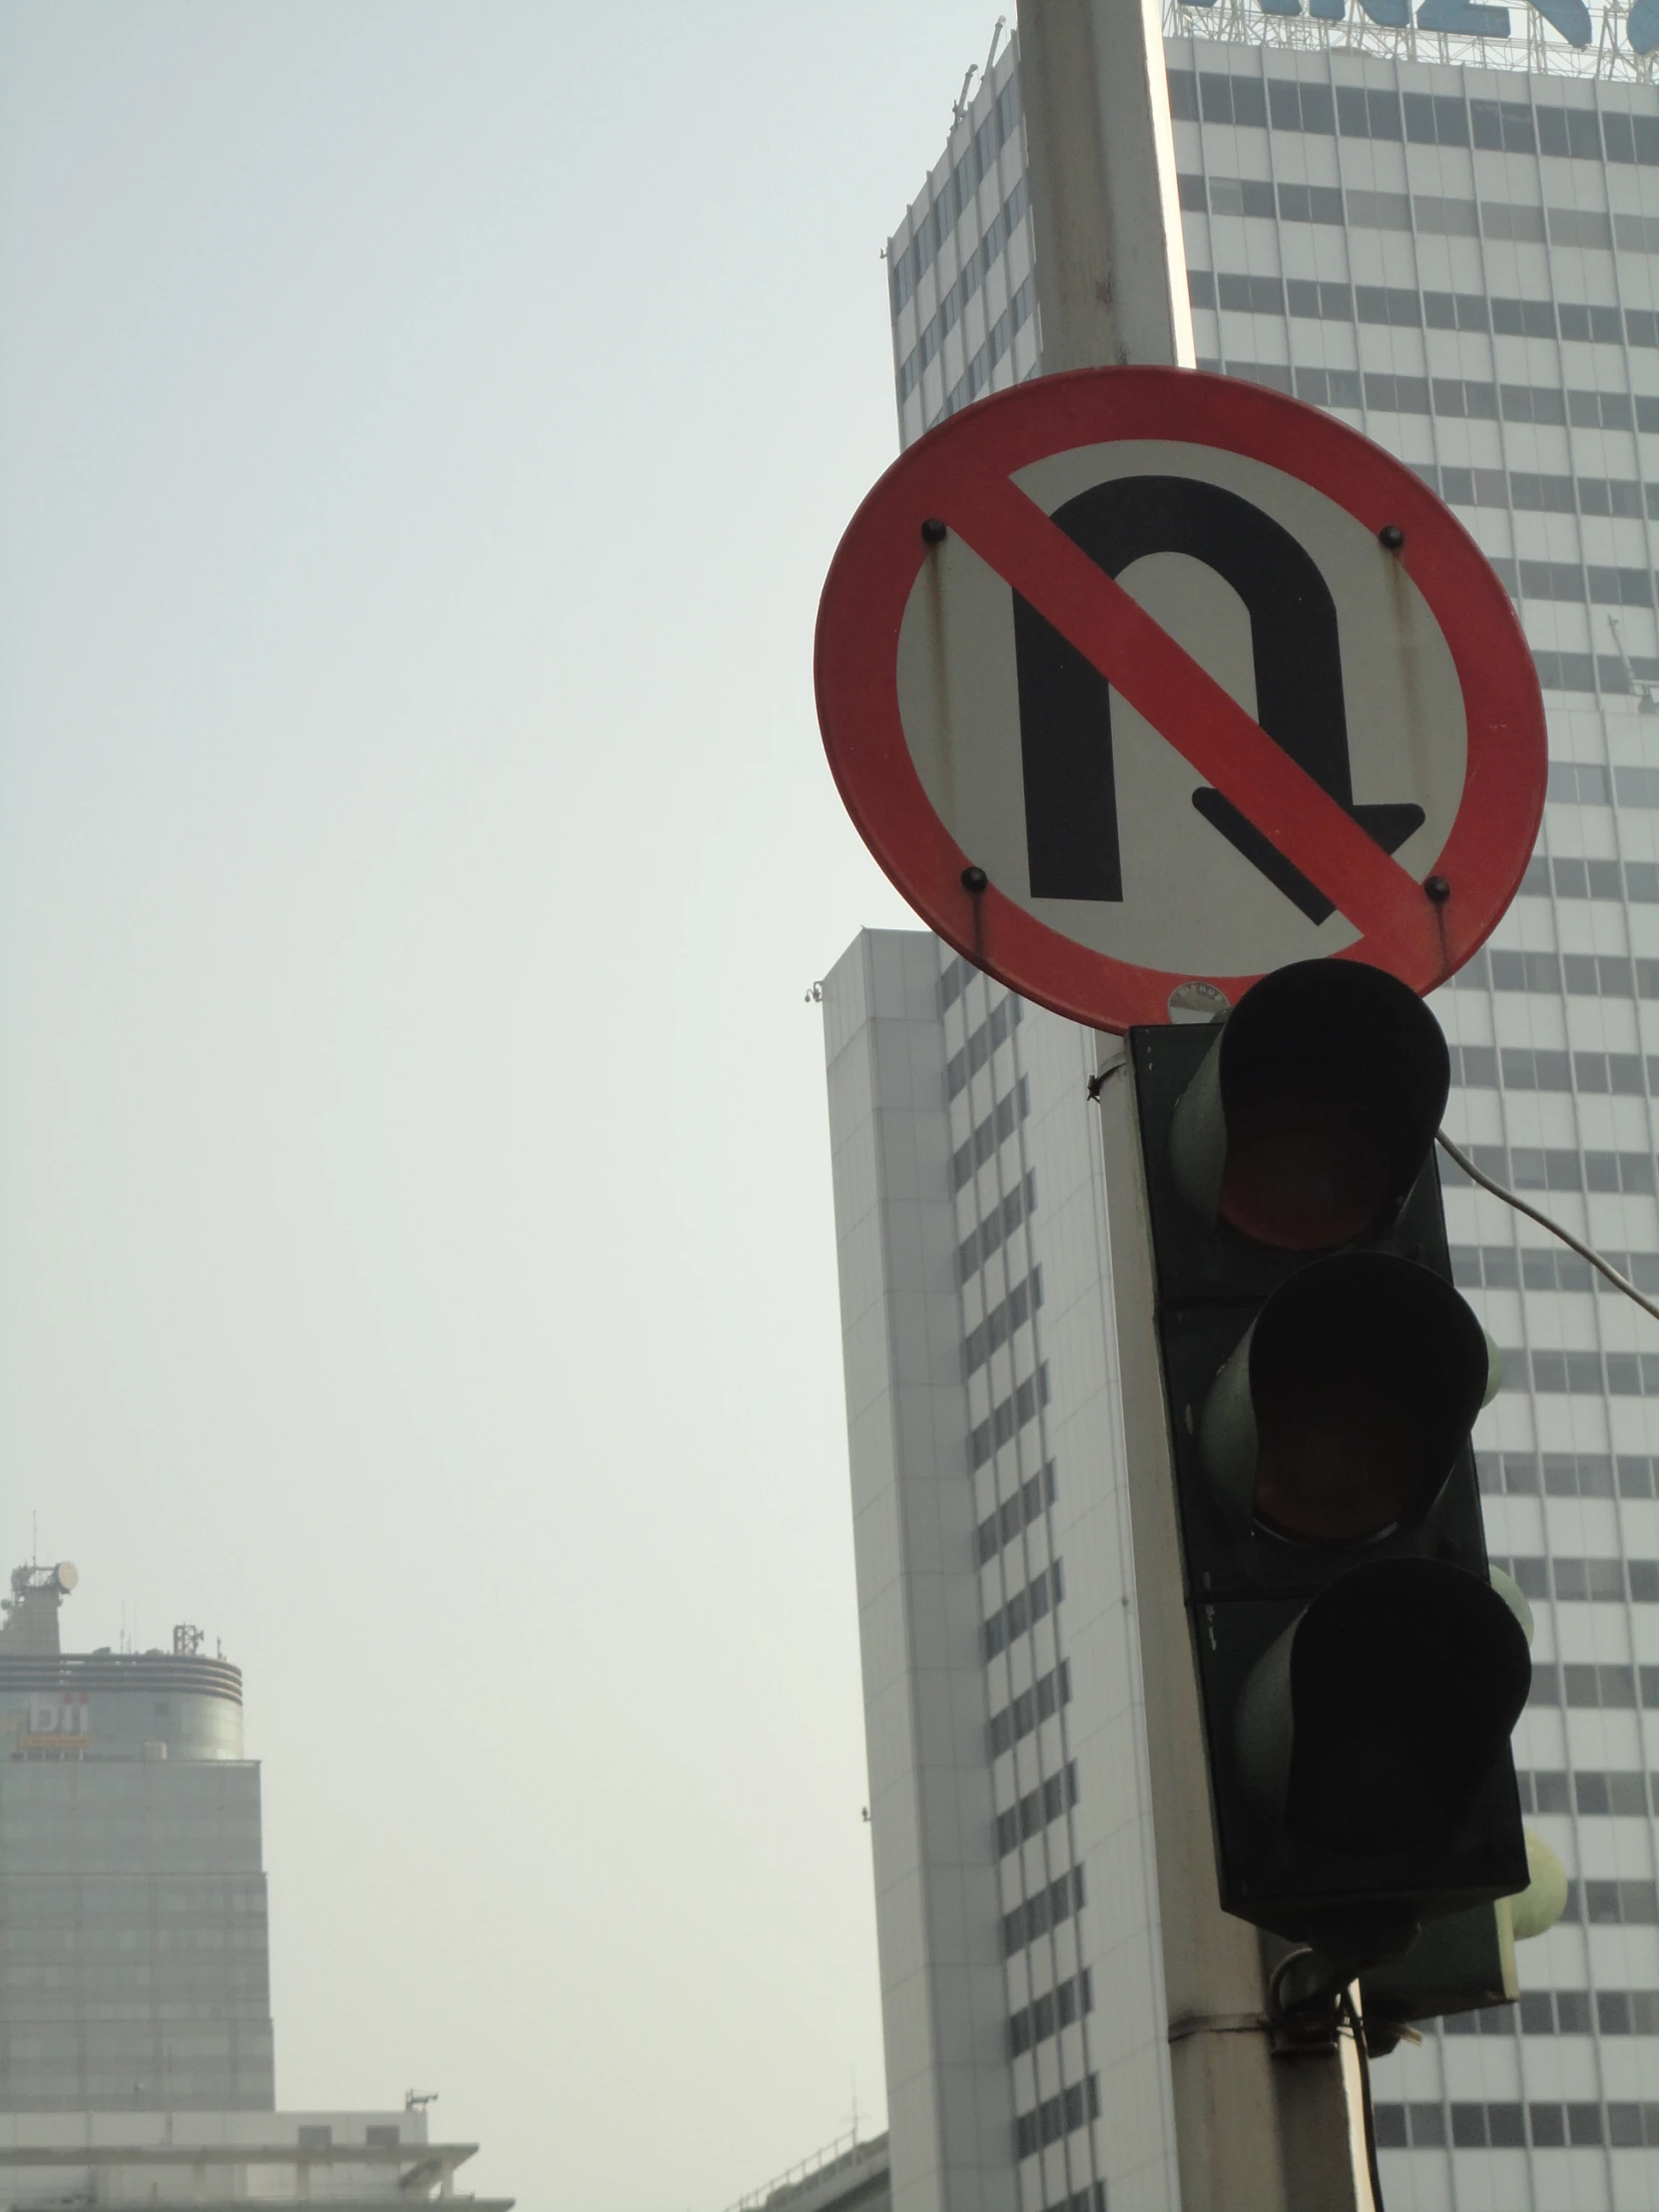 there is no left turn sign on the street light